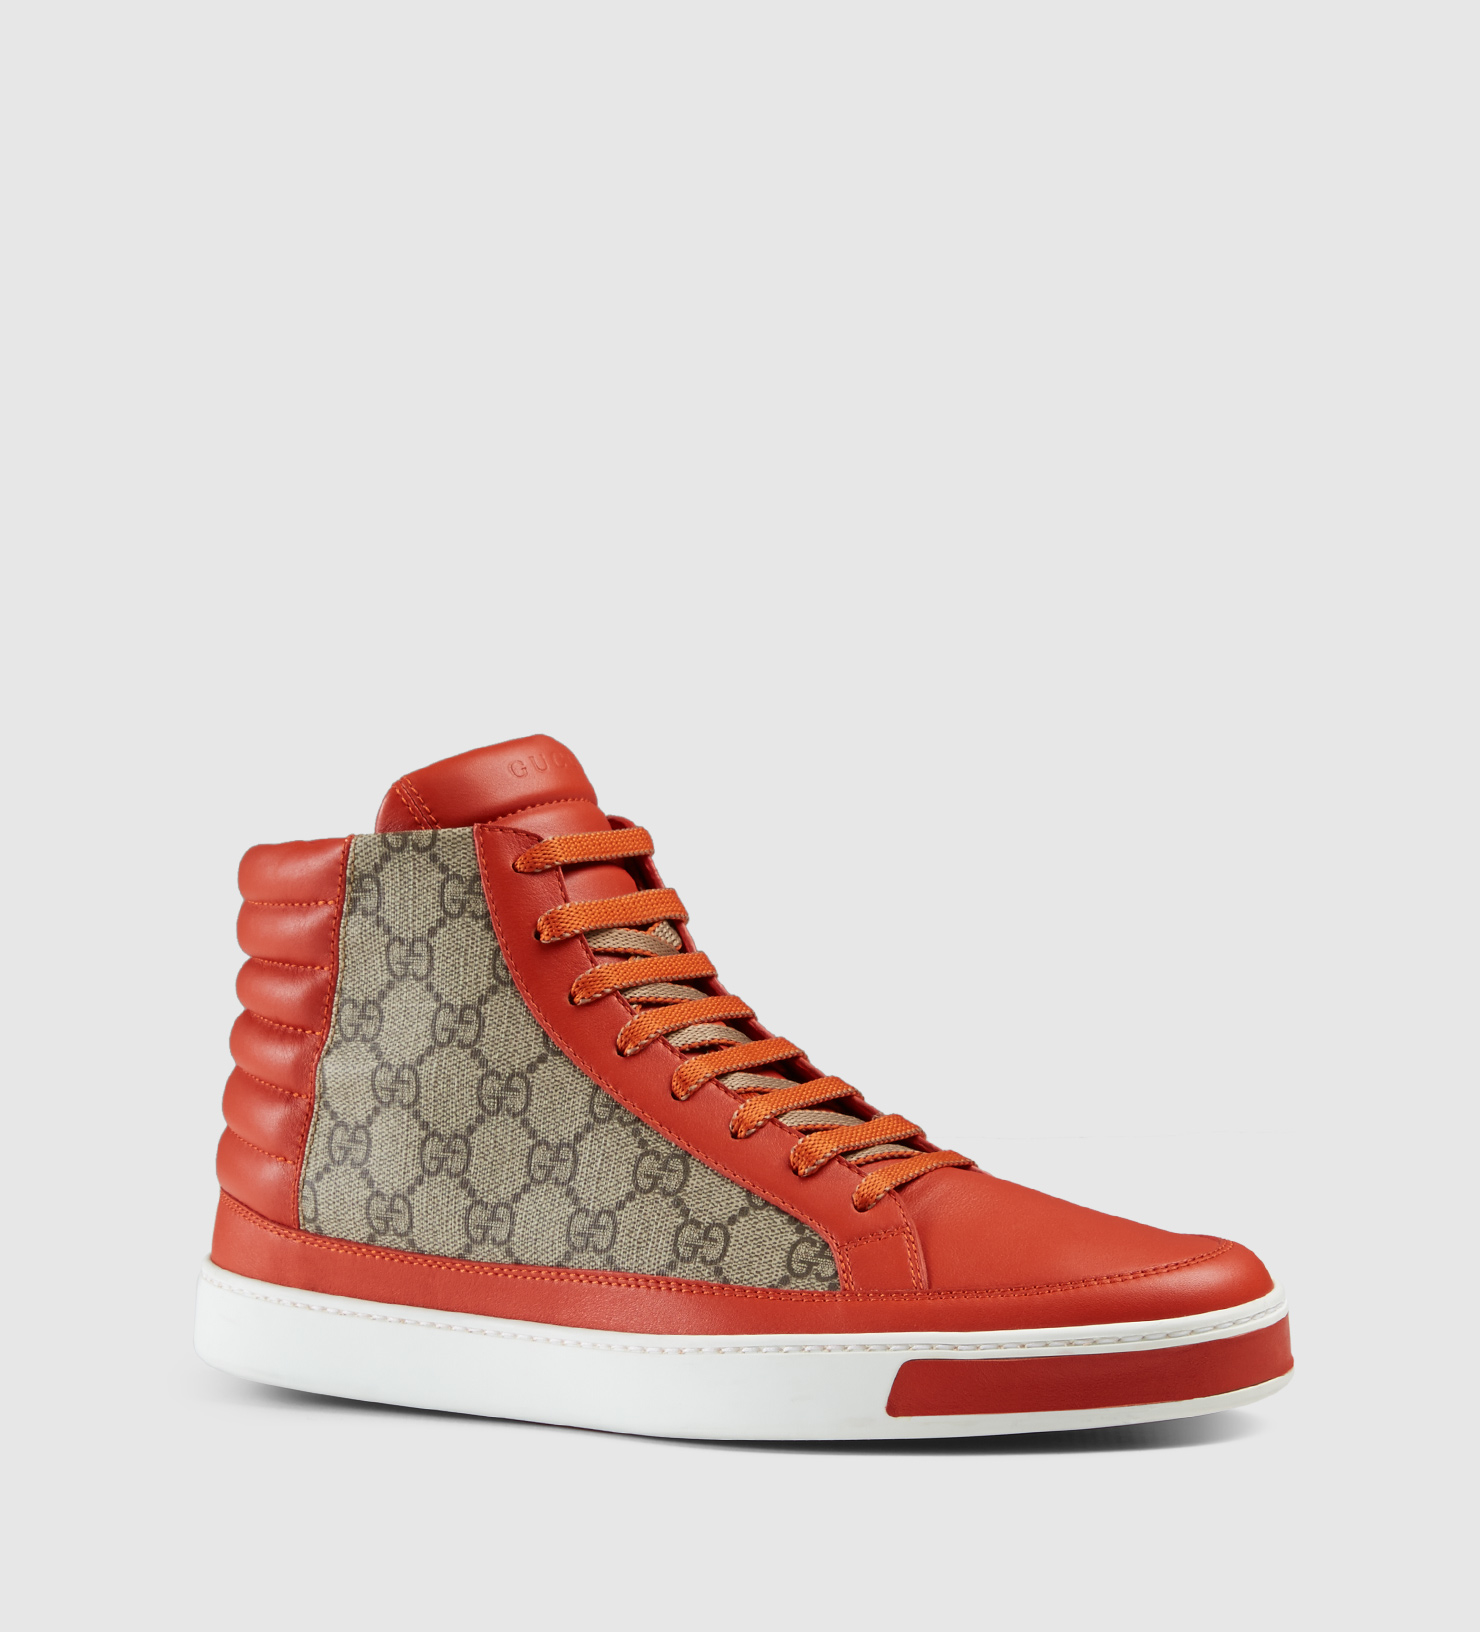 Gucci Gg Supreme And Leather High-top Sneaker in Orange for Men - Lyst